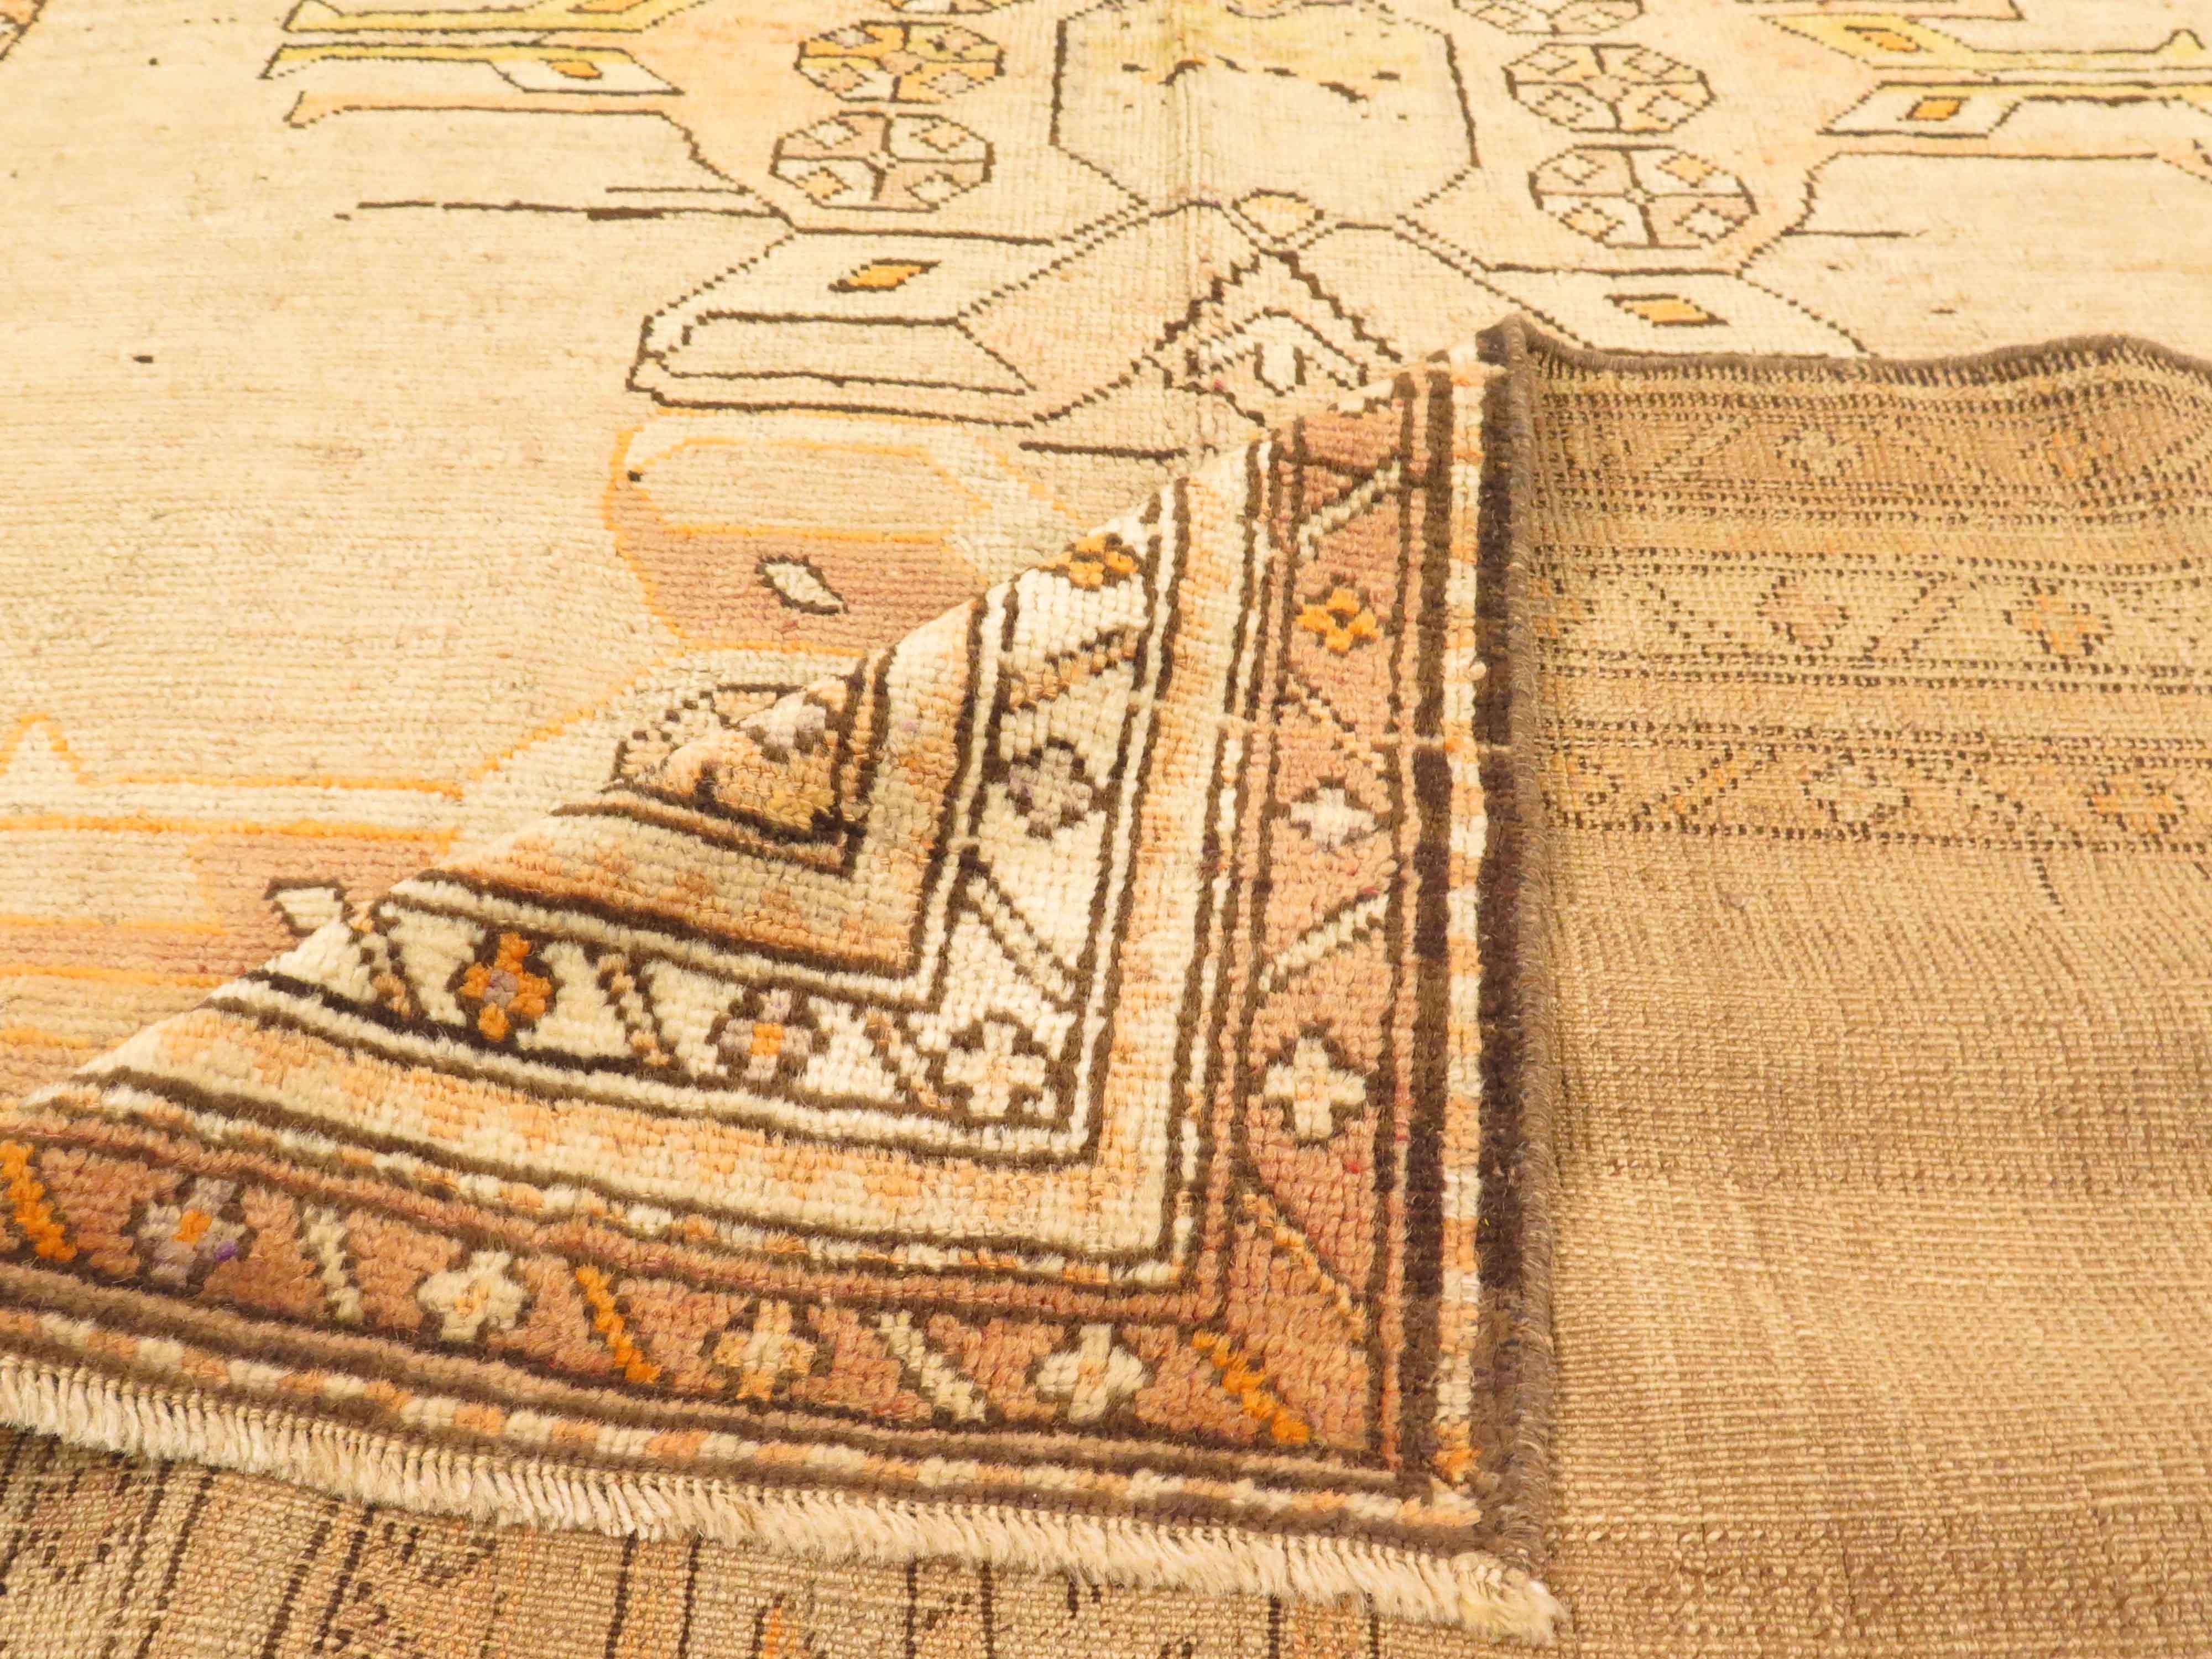 Antique Russian rug handwoven from the finest sheep’s wool and colored with all-natural vegetable dyes that are safe for humans and pets. It’s a traditional Kazak design featuring Scarab medallion details in beige and black over an ivory field. It’s